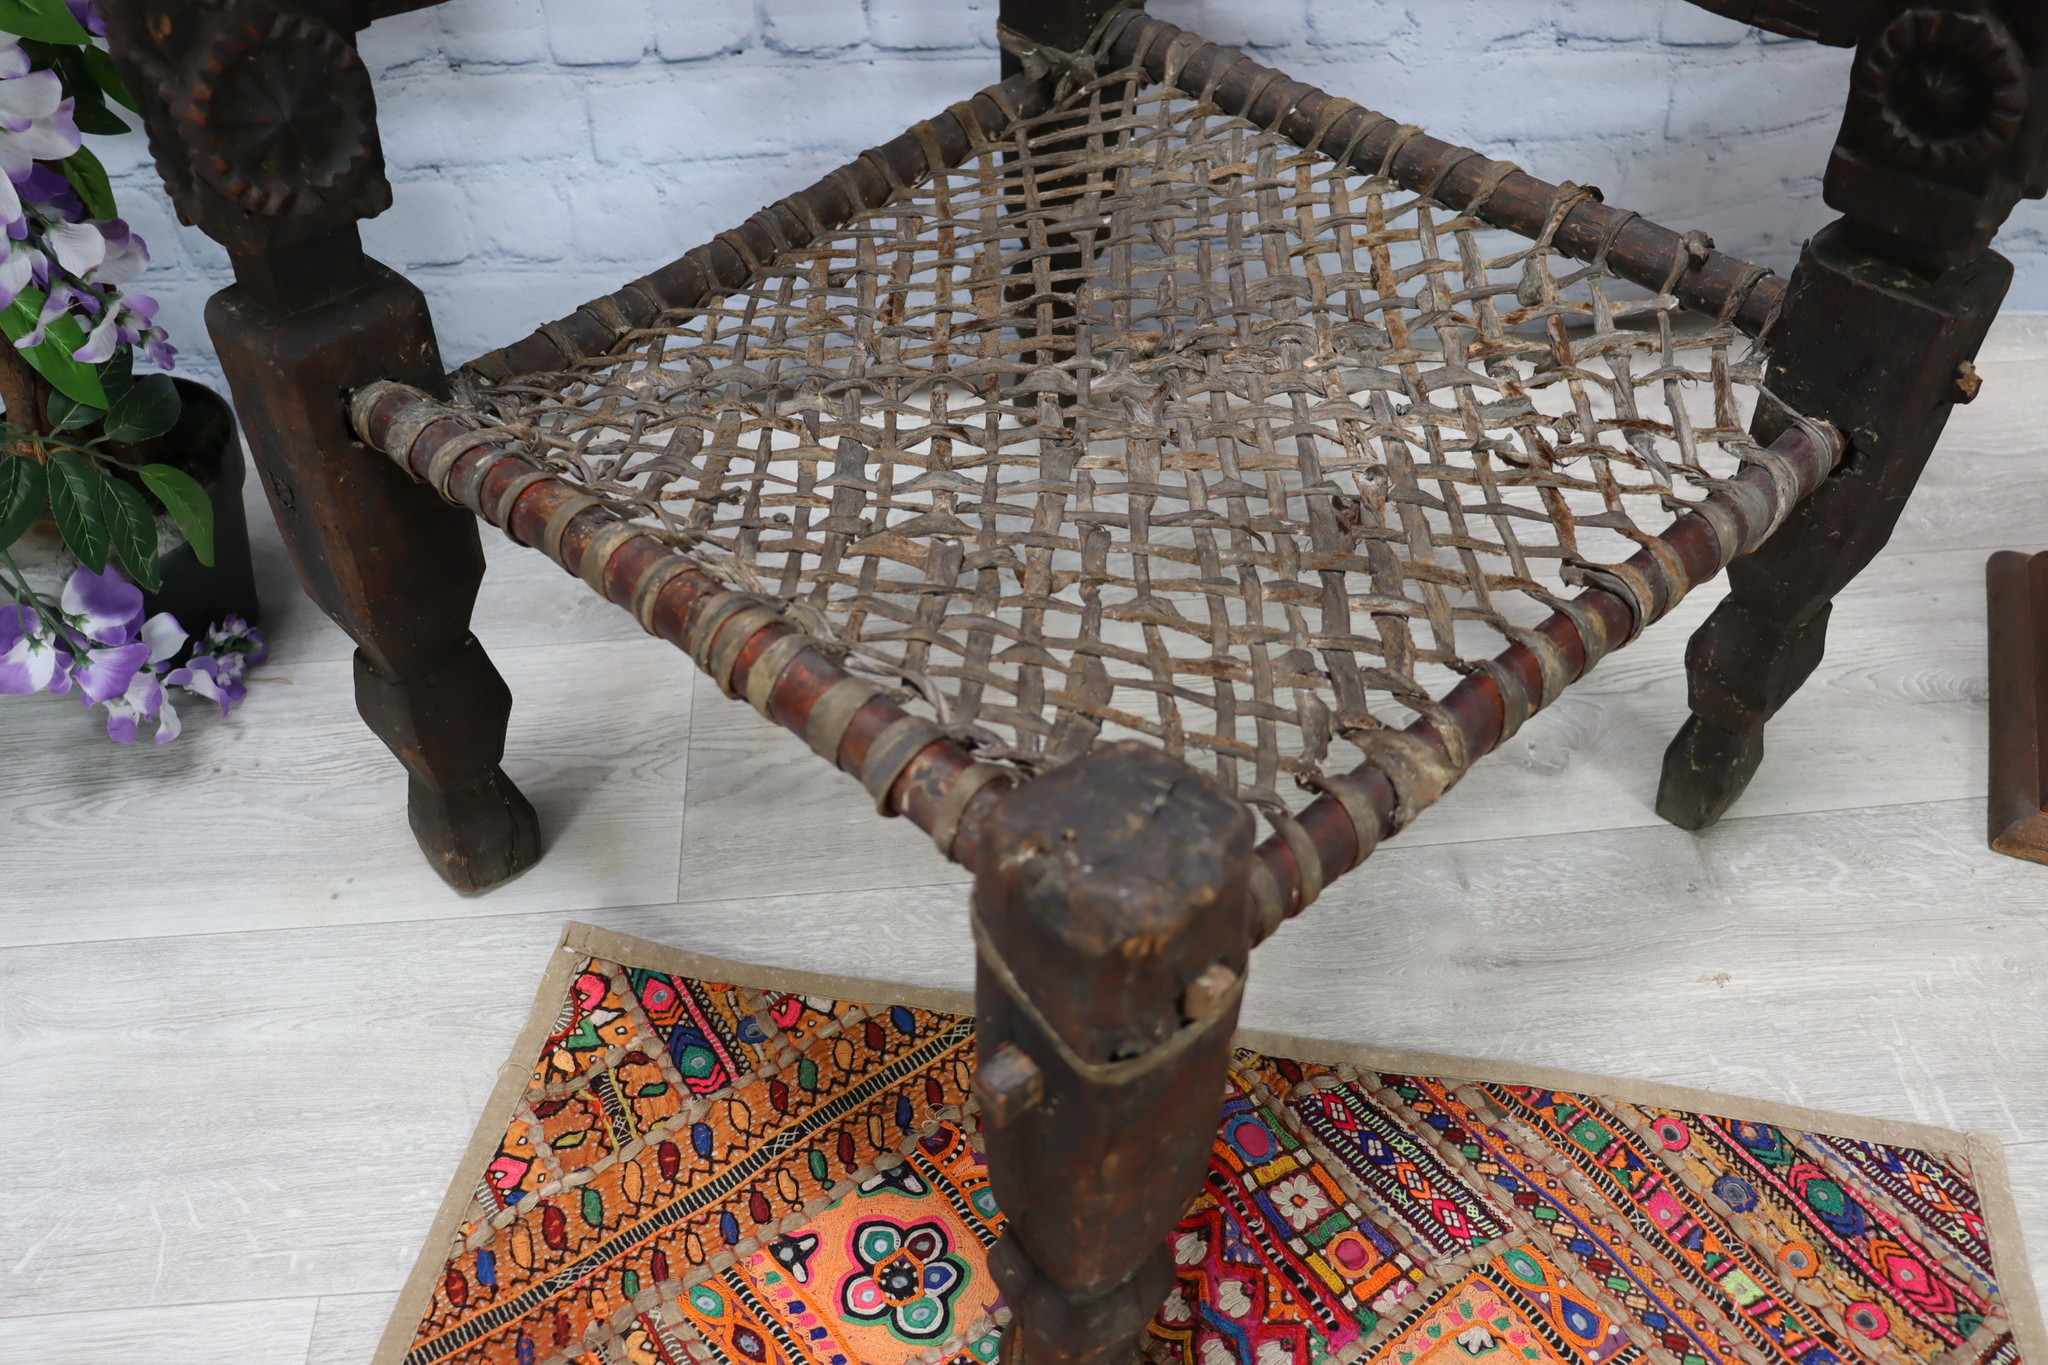 antique 19th century orient vintage cedar wood Chair from Nuristan Afghanistan / Swat Valley-Pakistan with two adjoining back